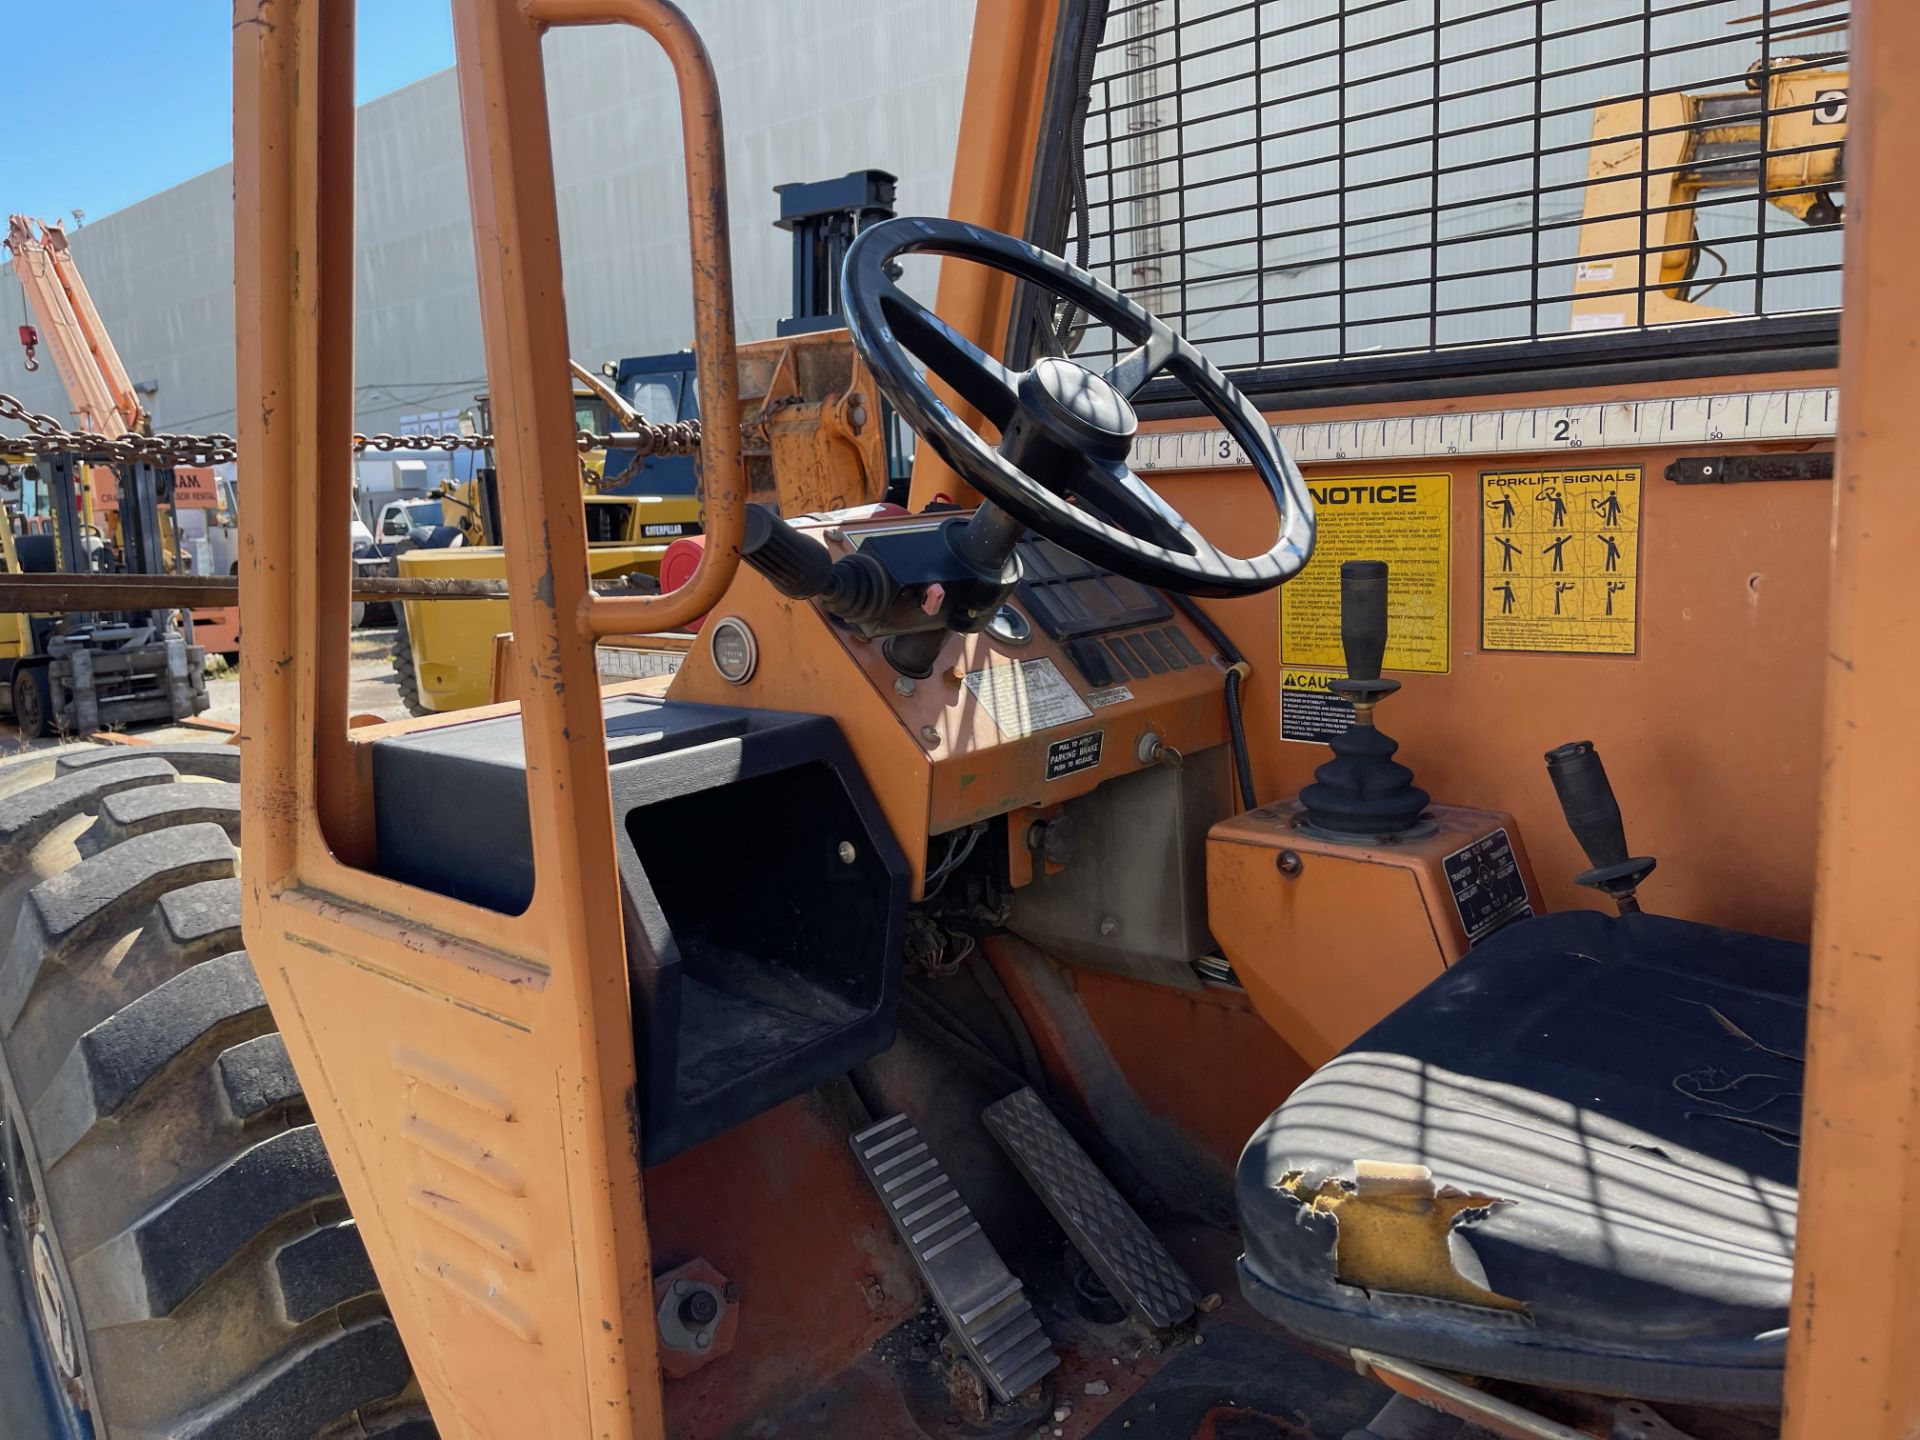 Lull 1044C054 10,000lb Telescopic Forklift - Located in Lester, PA - Image 3 of 7